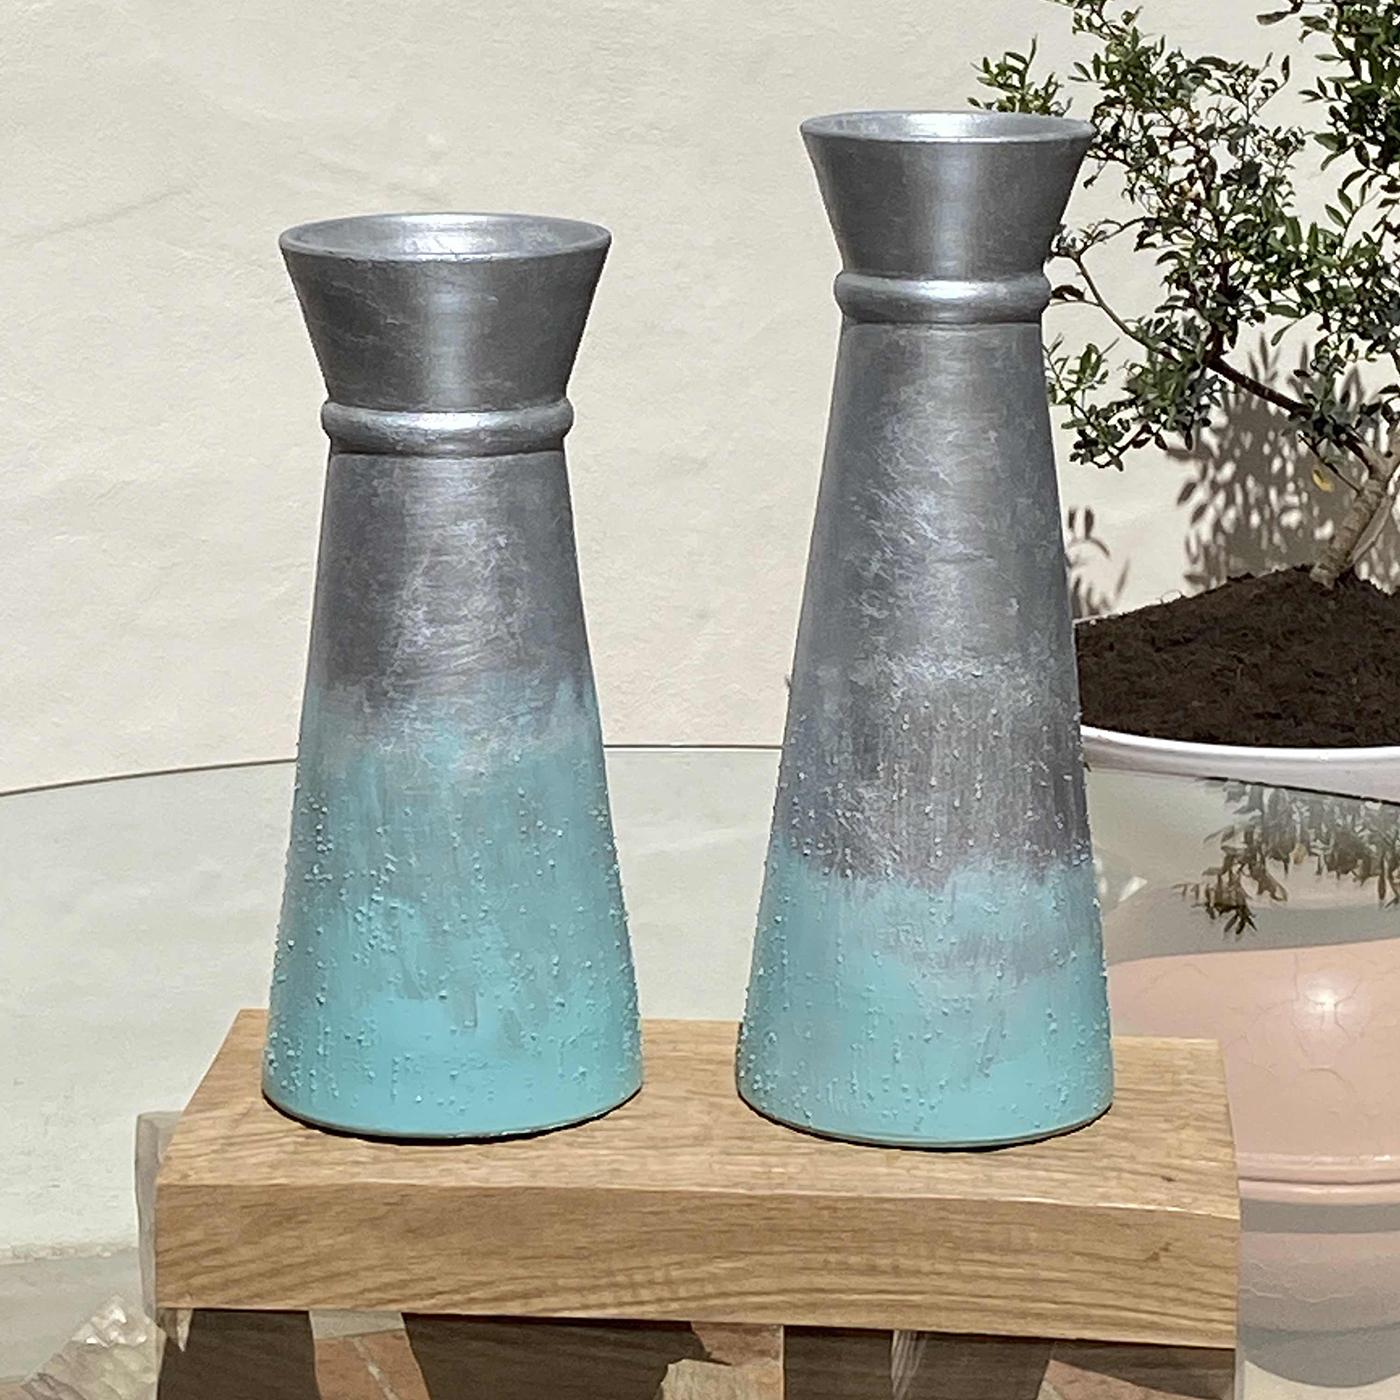 The Calafuria Due 2 vases by Mascia Meccani comprises two vases: one tall and one slightly shorter. Each hand-turned biscuit terracotta vase is hand-painted in sky blue and silver tones, enhanced with subtle textured detailing. Set on a sculpted